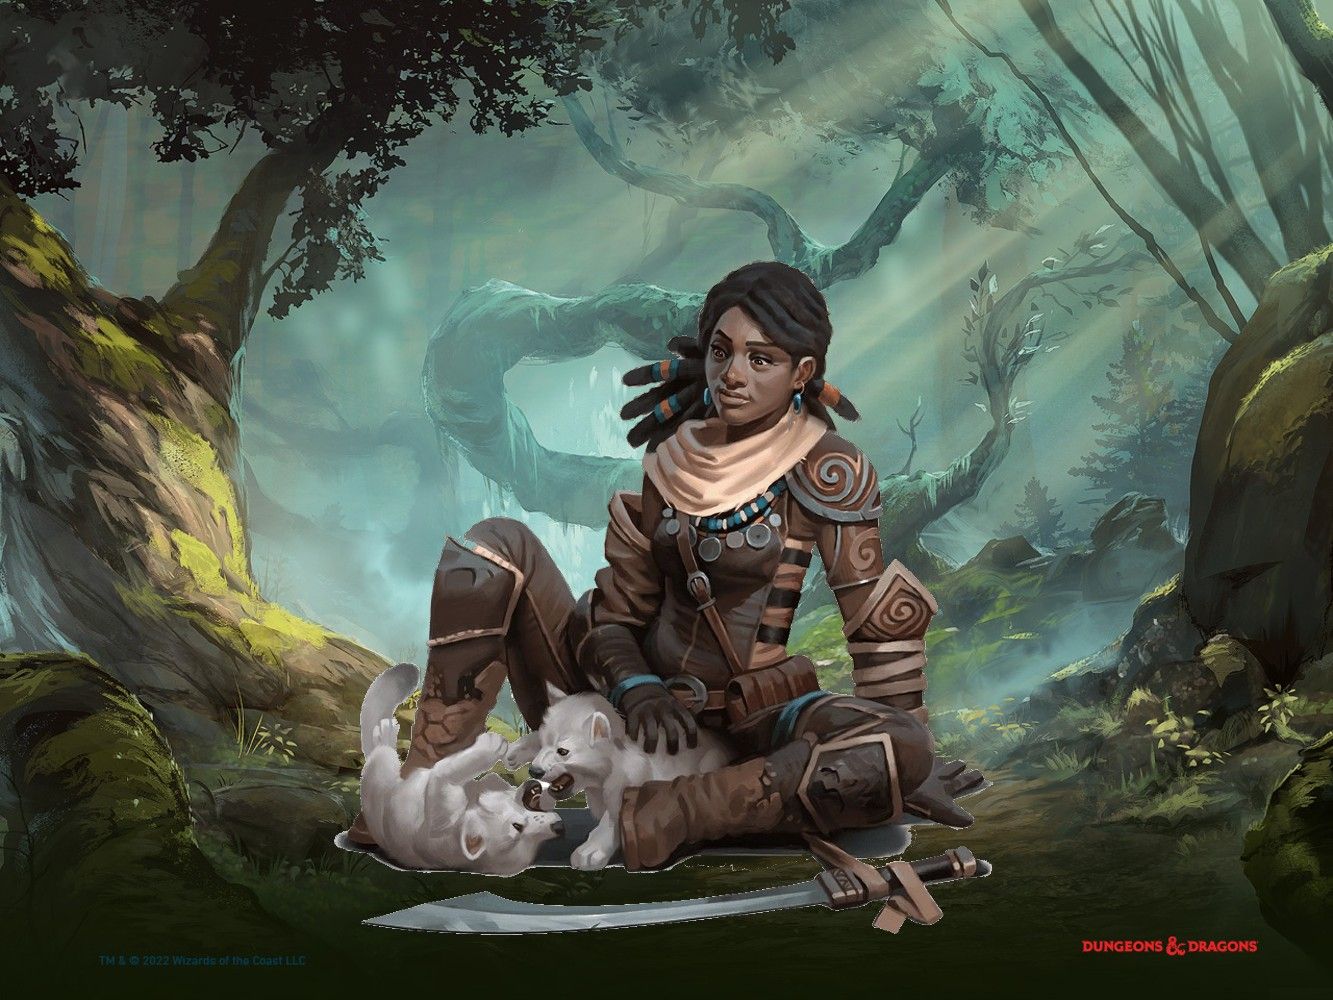 Circle of the Shepherd Druid with two wolves and a sword at her feet, sitting down in a wilderness locale.